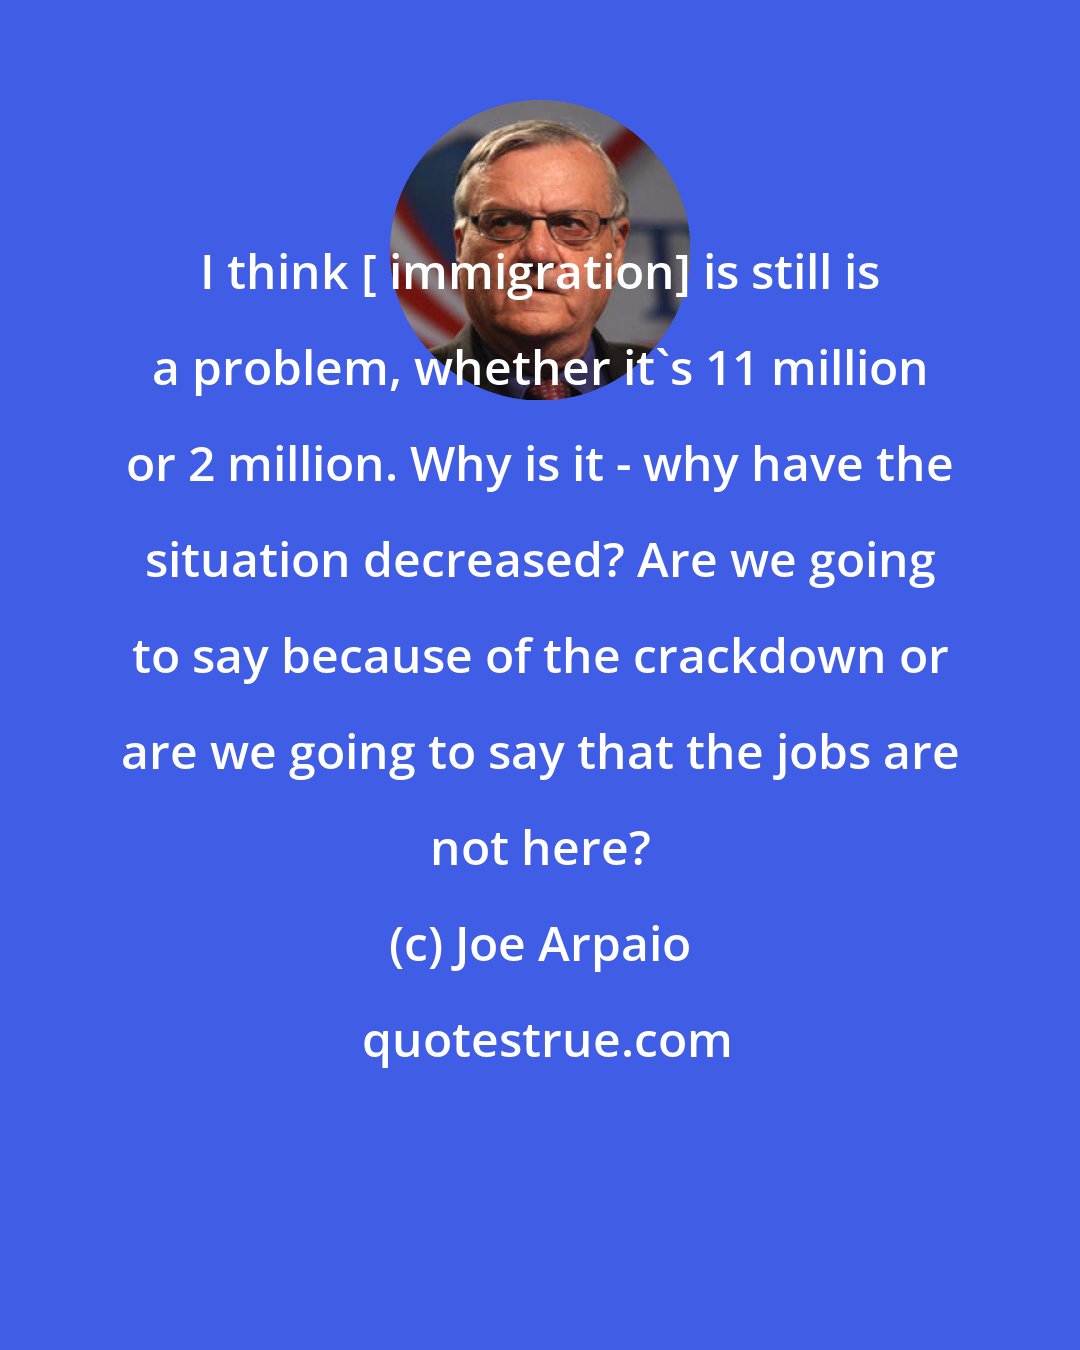 Joe Arpaio: I think [ immigration] is still is a problem, whether it's 11 million or 2 million. Why is it - why have the situation decreased? Are we going to say because of the crackdown or are we going to say that the jobs are not here?